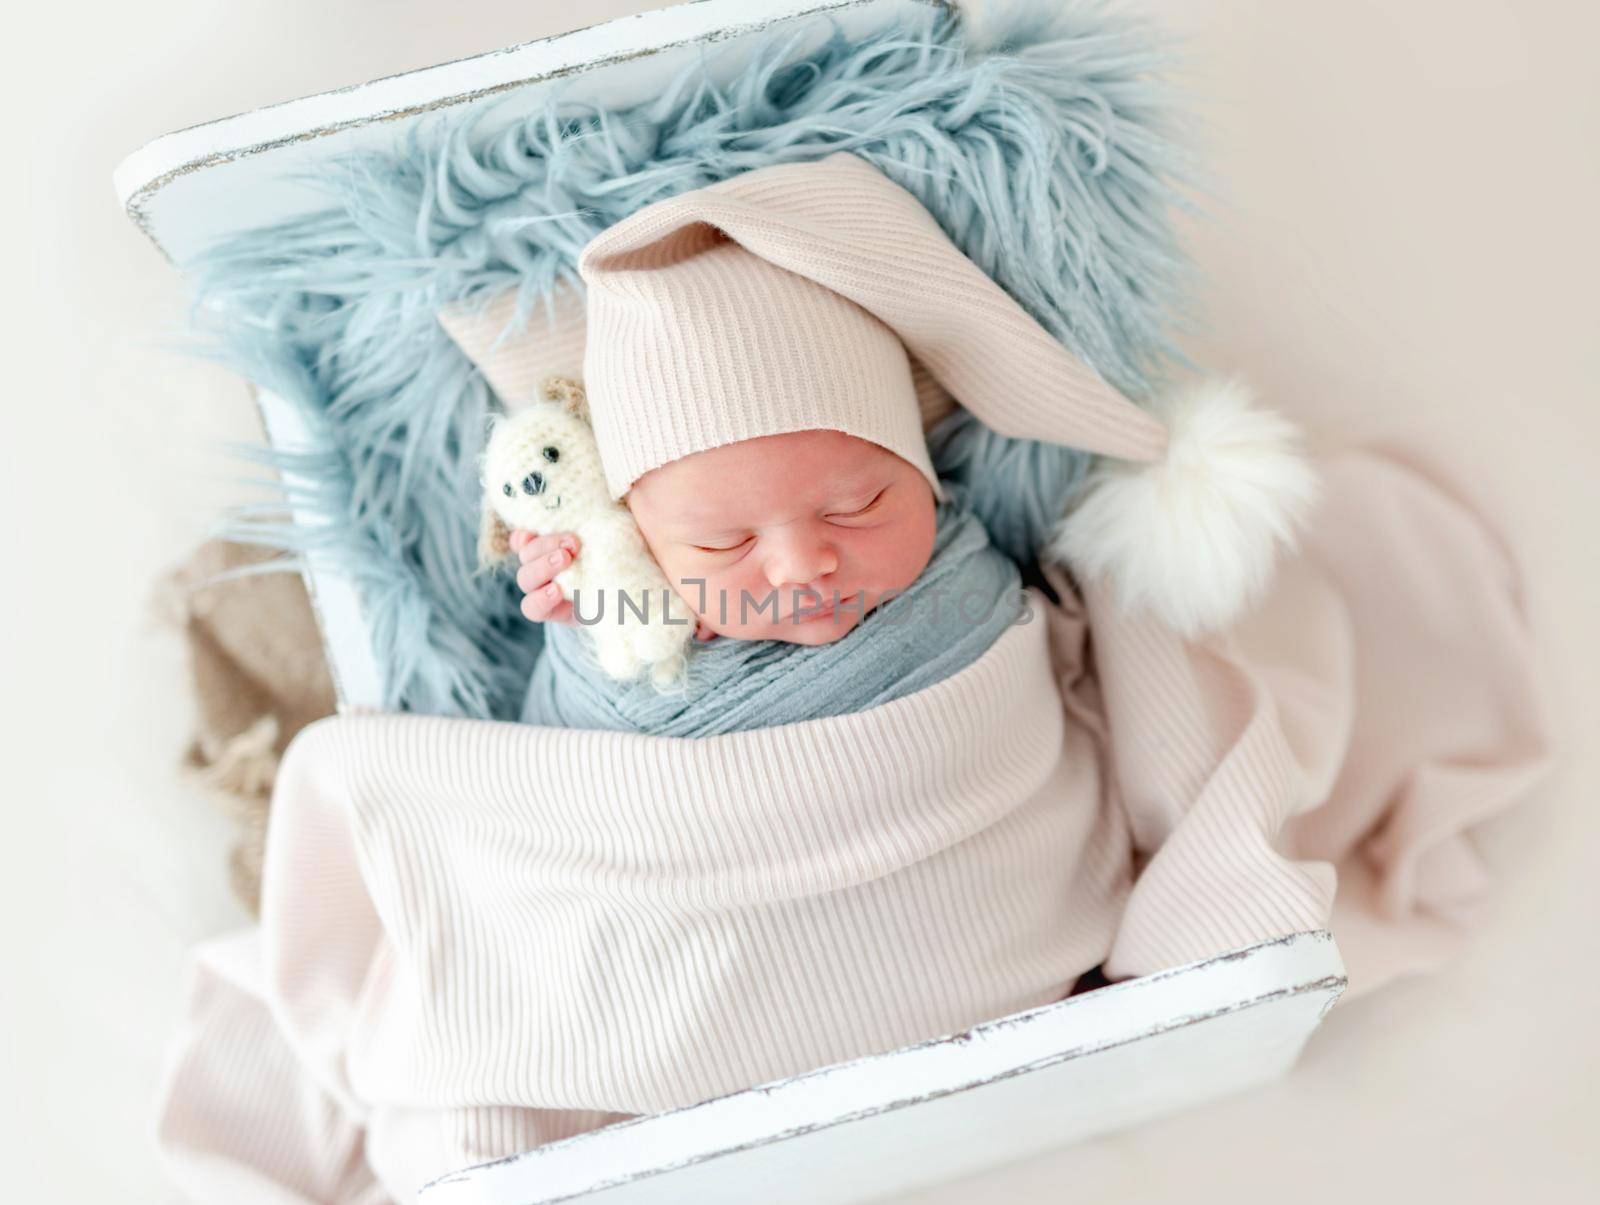 Portrait of newborn baby boy wearing knitted hat sleeping on white small designed bed under blanket and holding toy. Adorable infant child napping during studio photoshoot